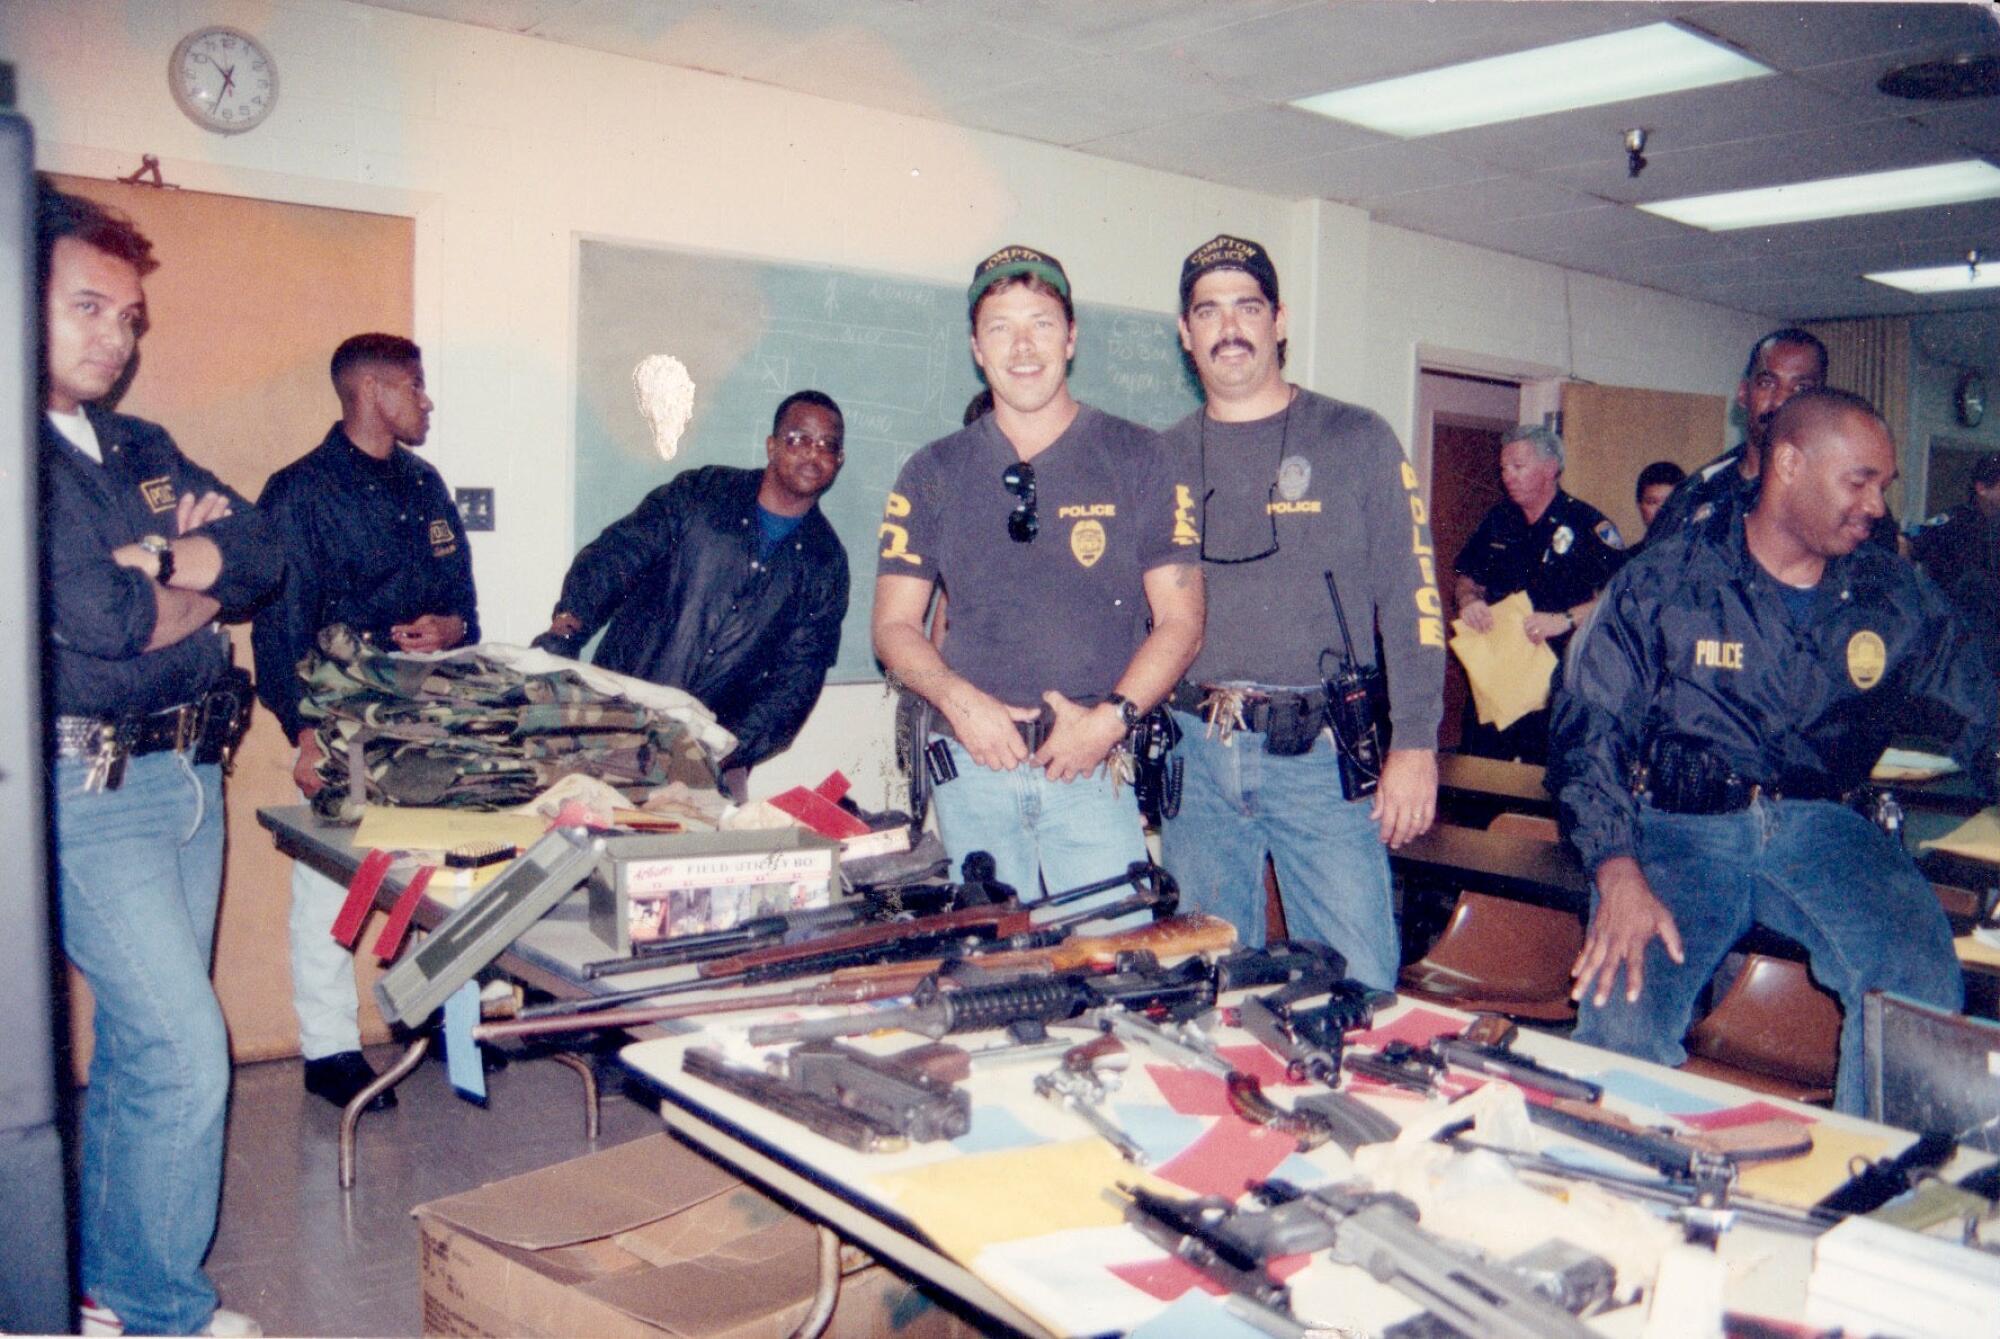 October 1996 photo from the Compton Police Department.